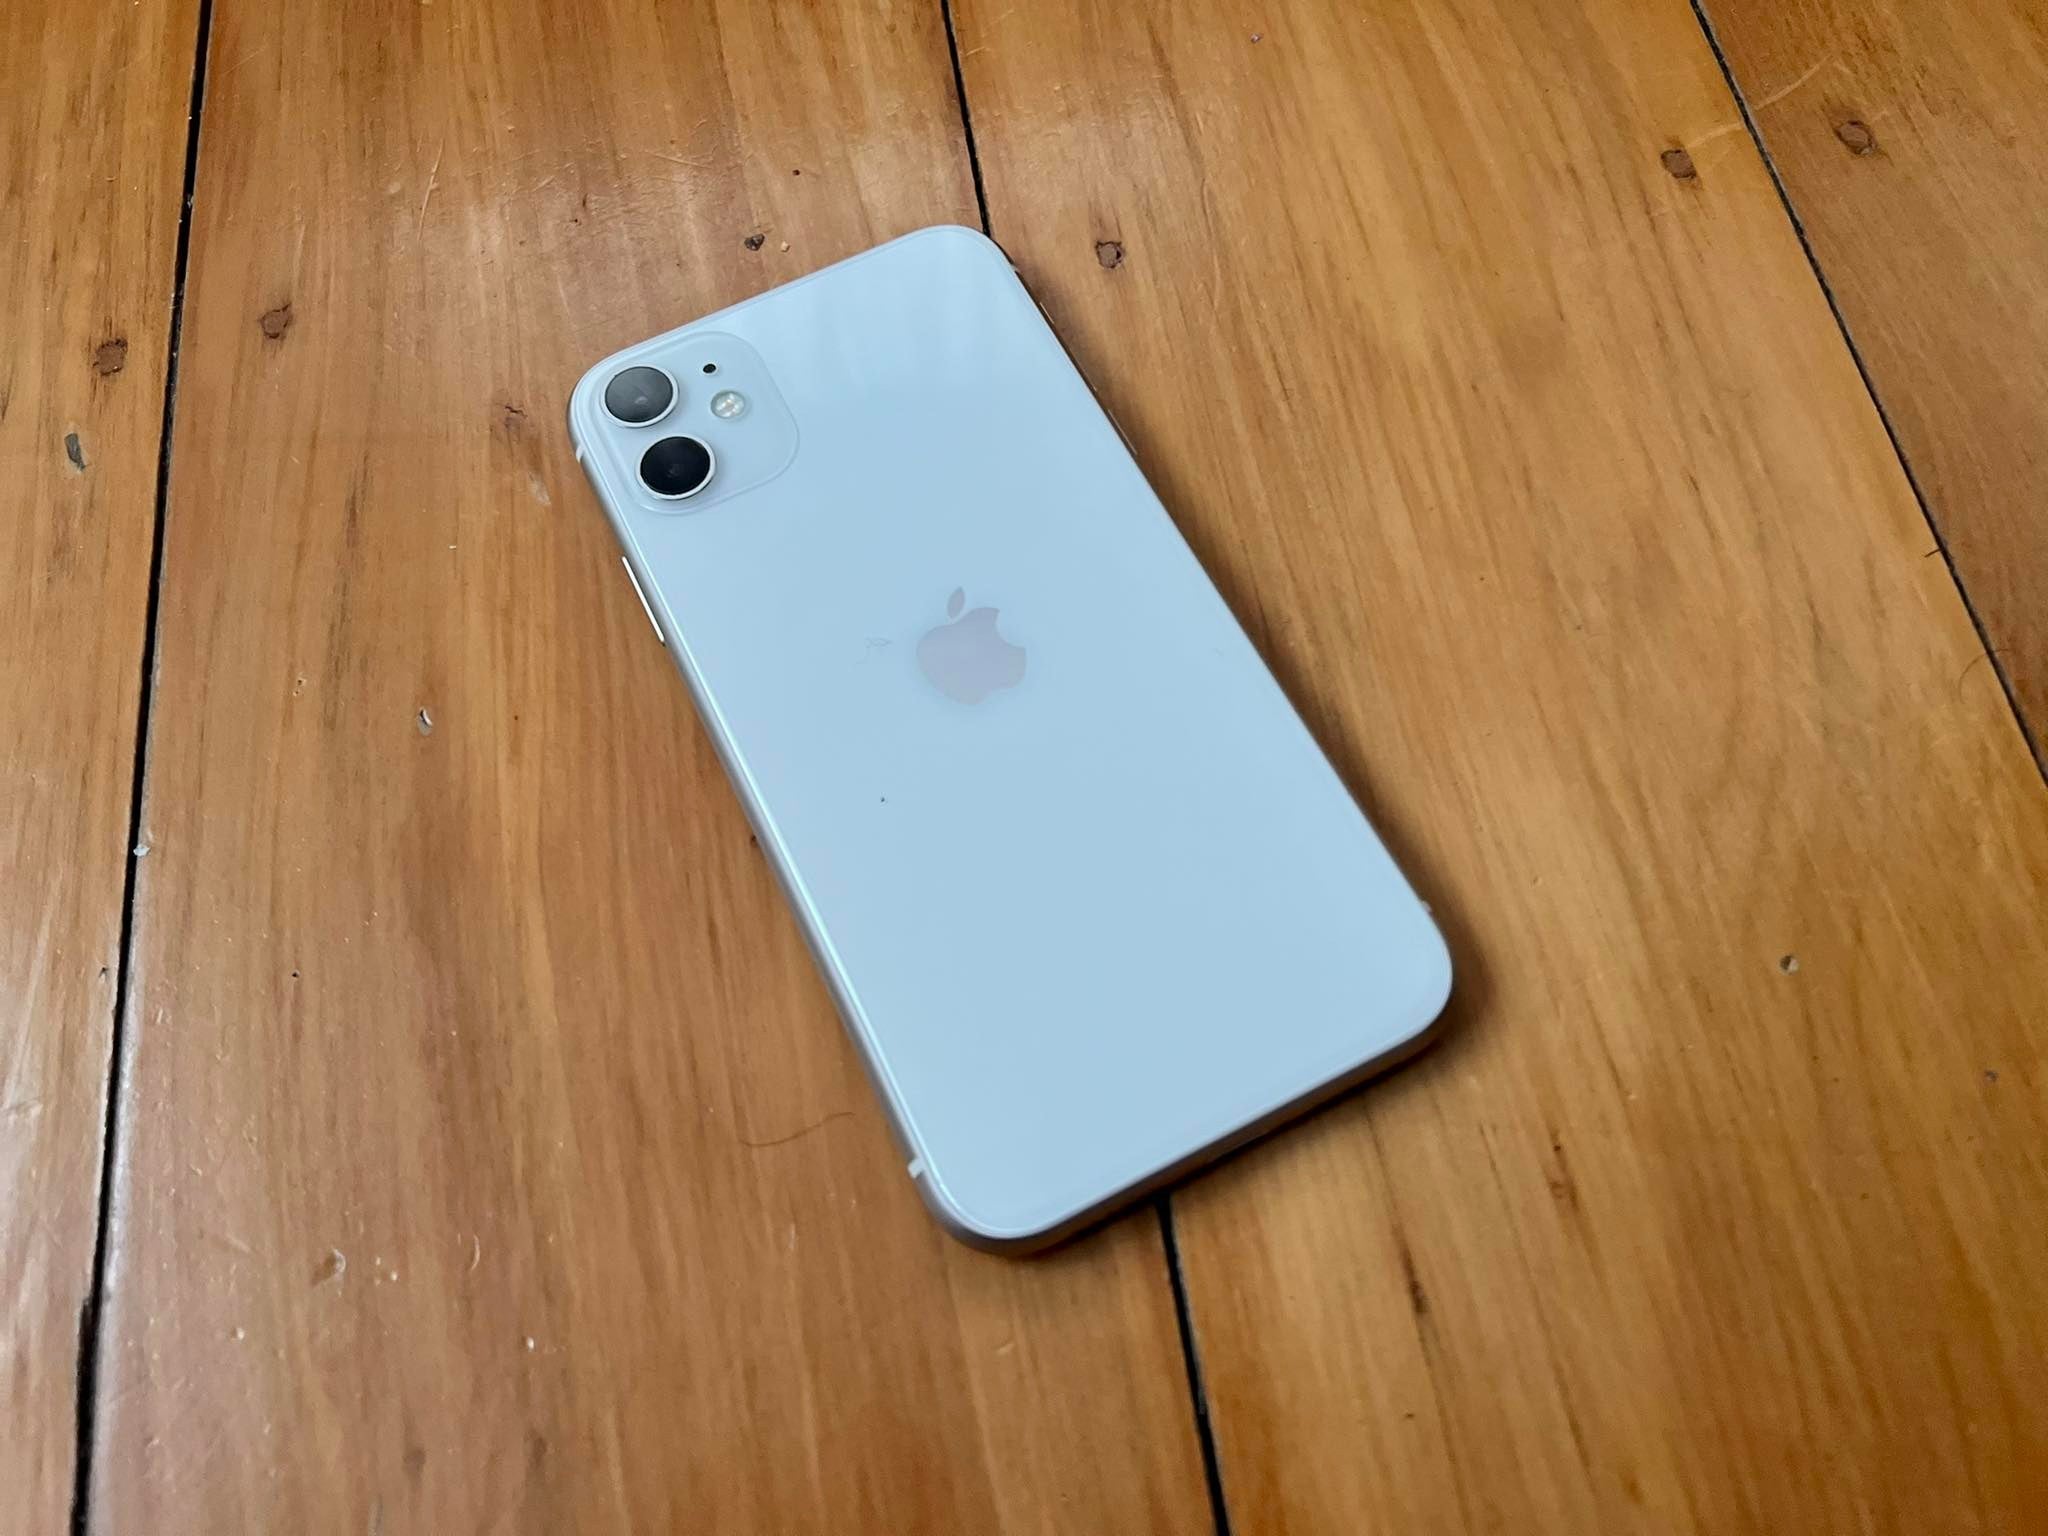 Apple iPhone 11 64GB White - New Case, Glass Screen Protector & Shipping (Excellent) Battery Service